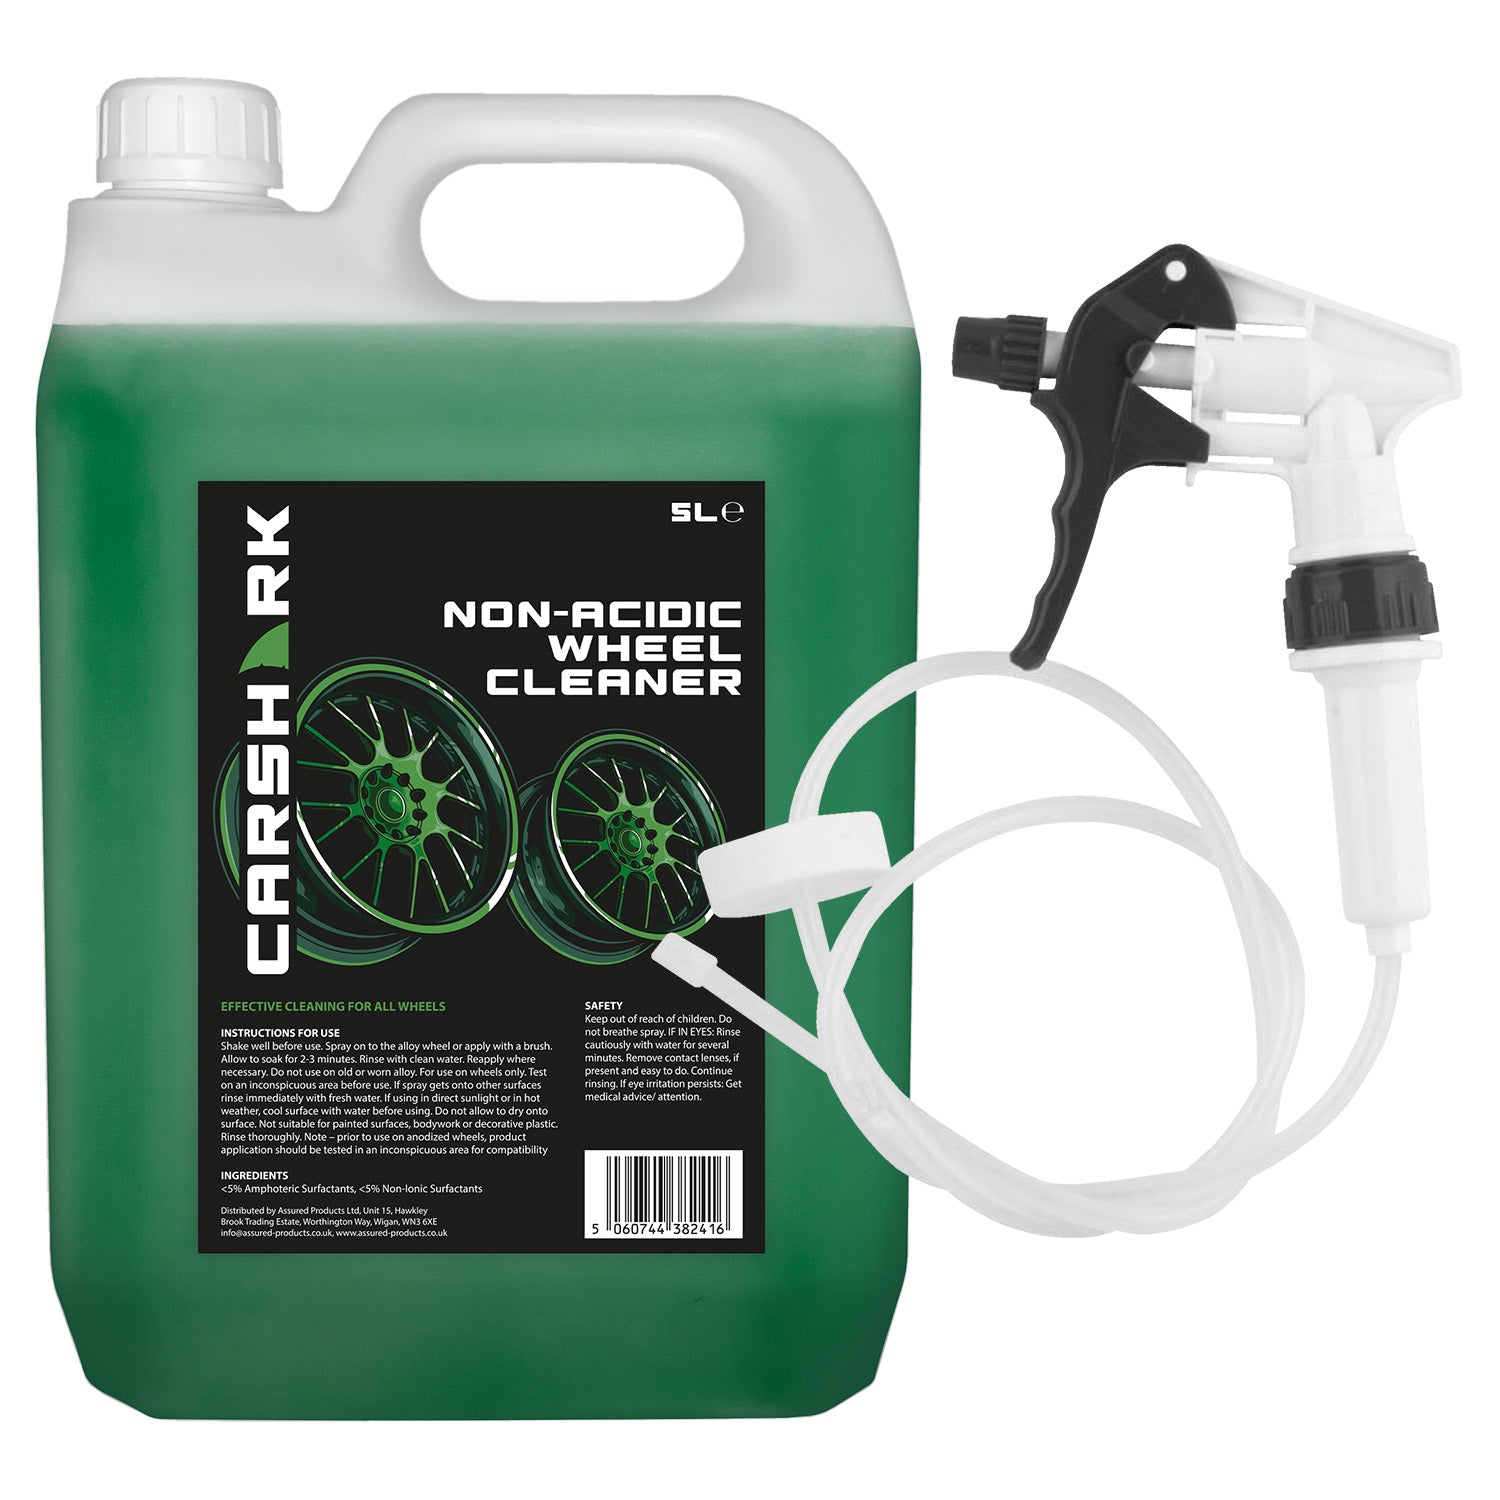 CARSHARK Non-Acidic Wheel Cleaner 5L (with Long Hose Trigger)